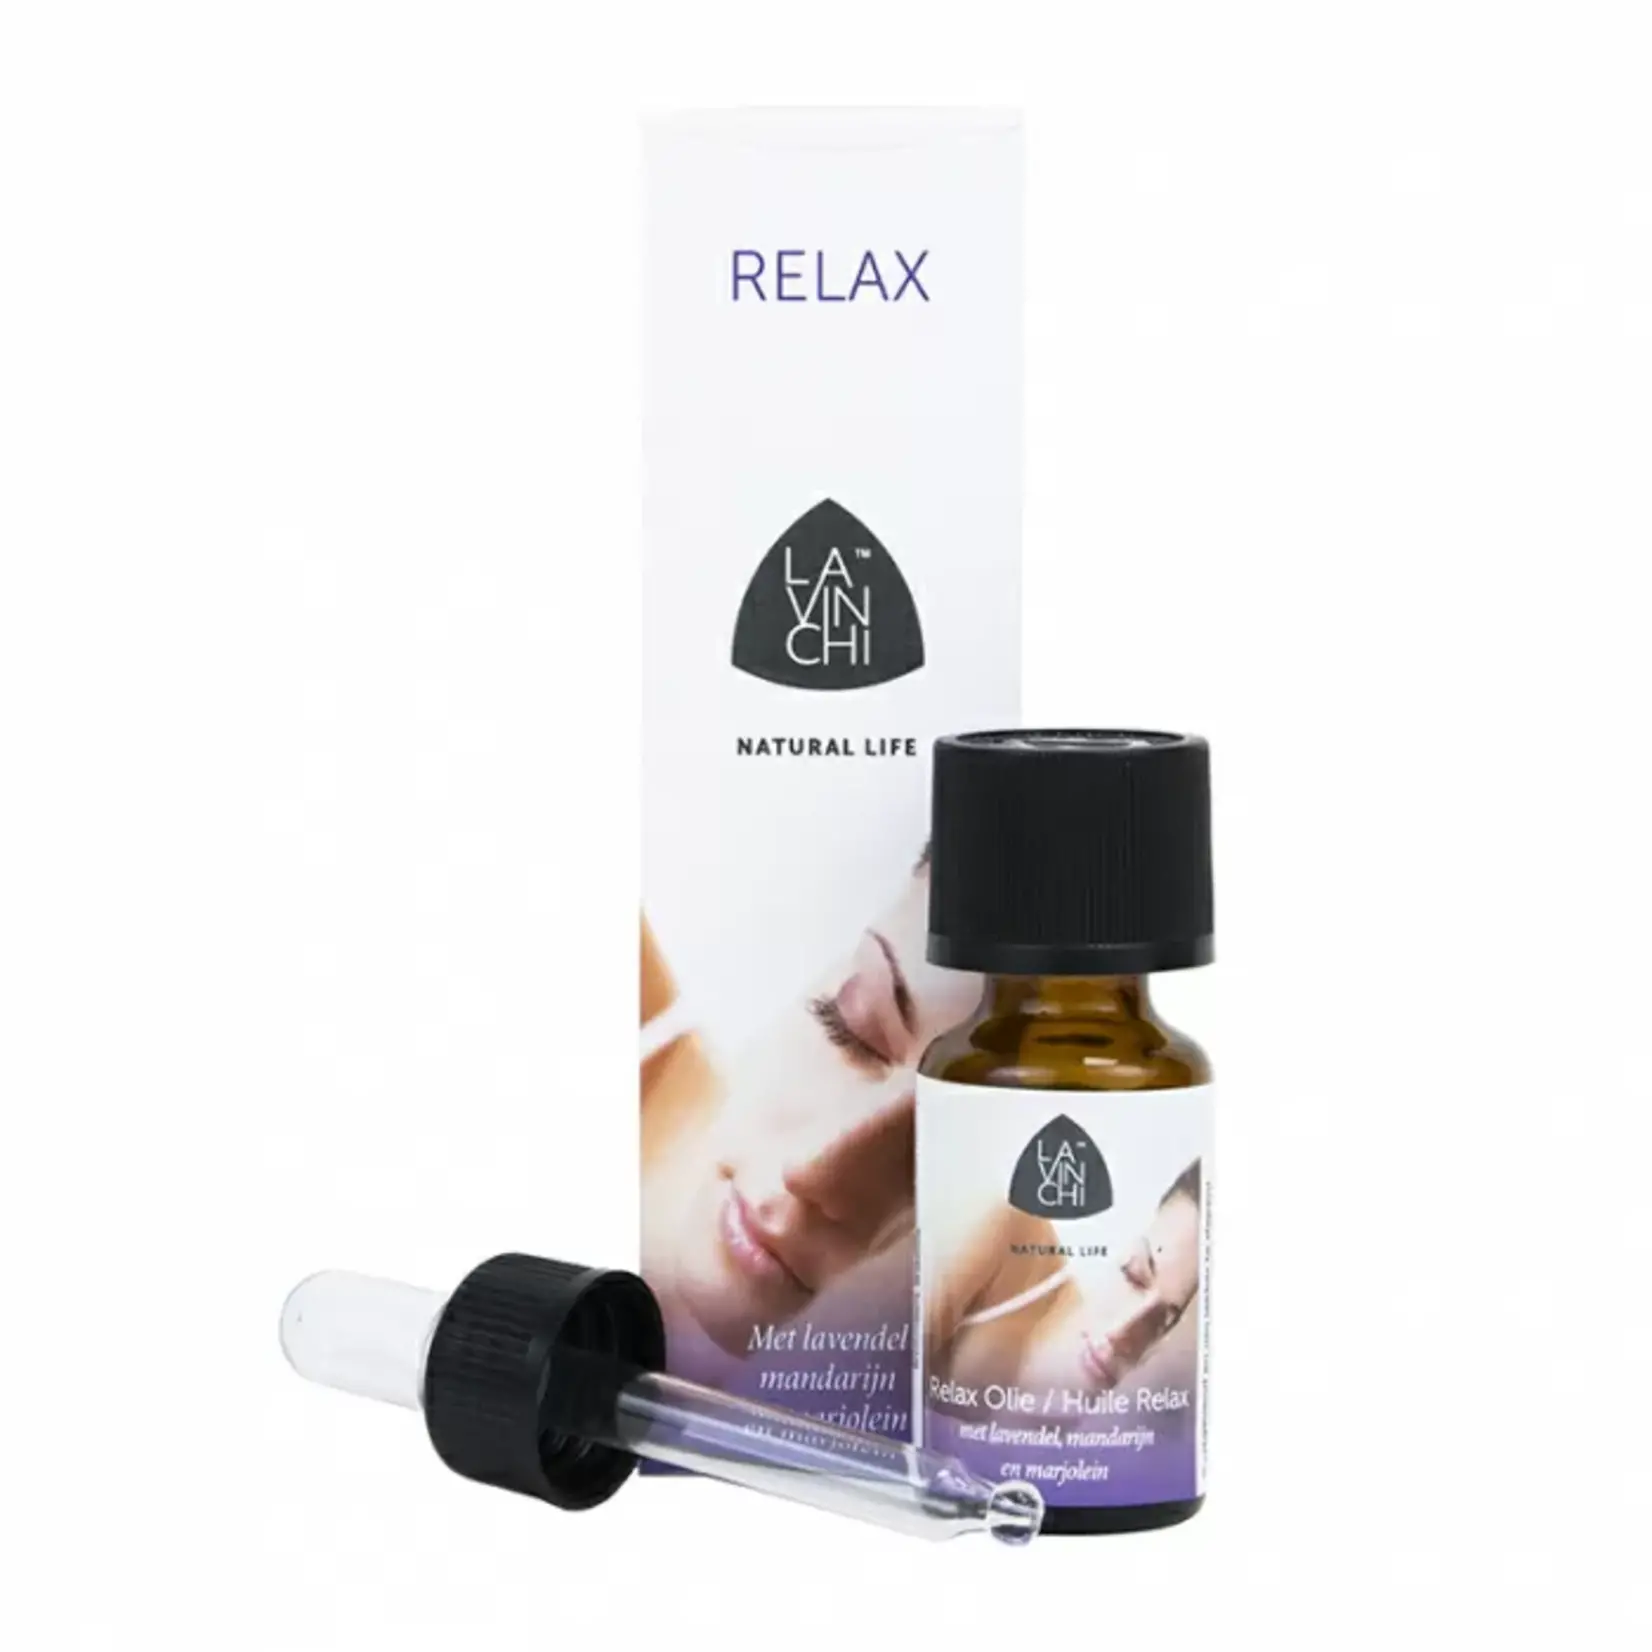 Chi Natural Life Lavinchi Relax mix olie - 30 ml